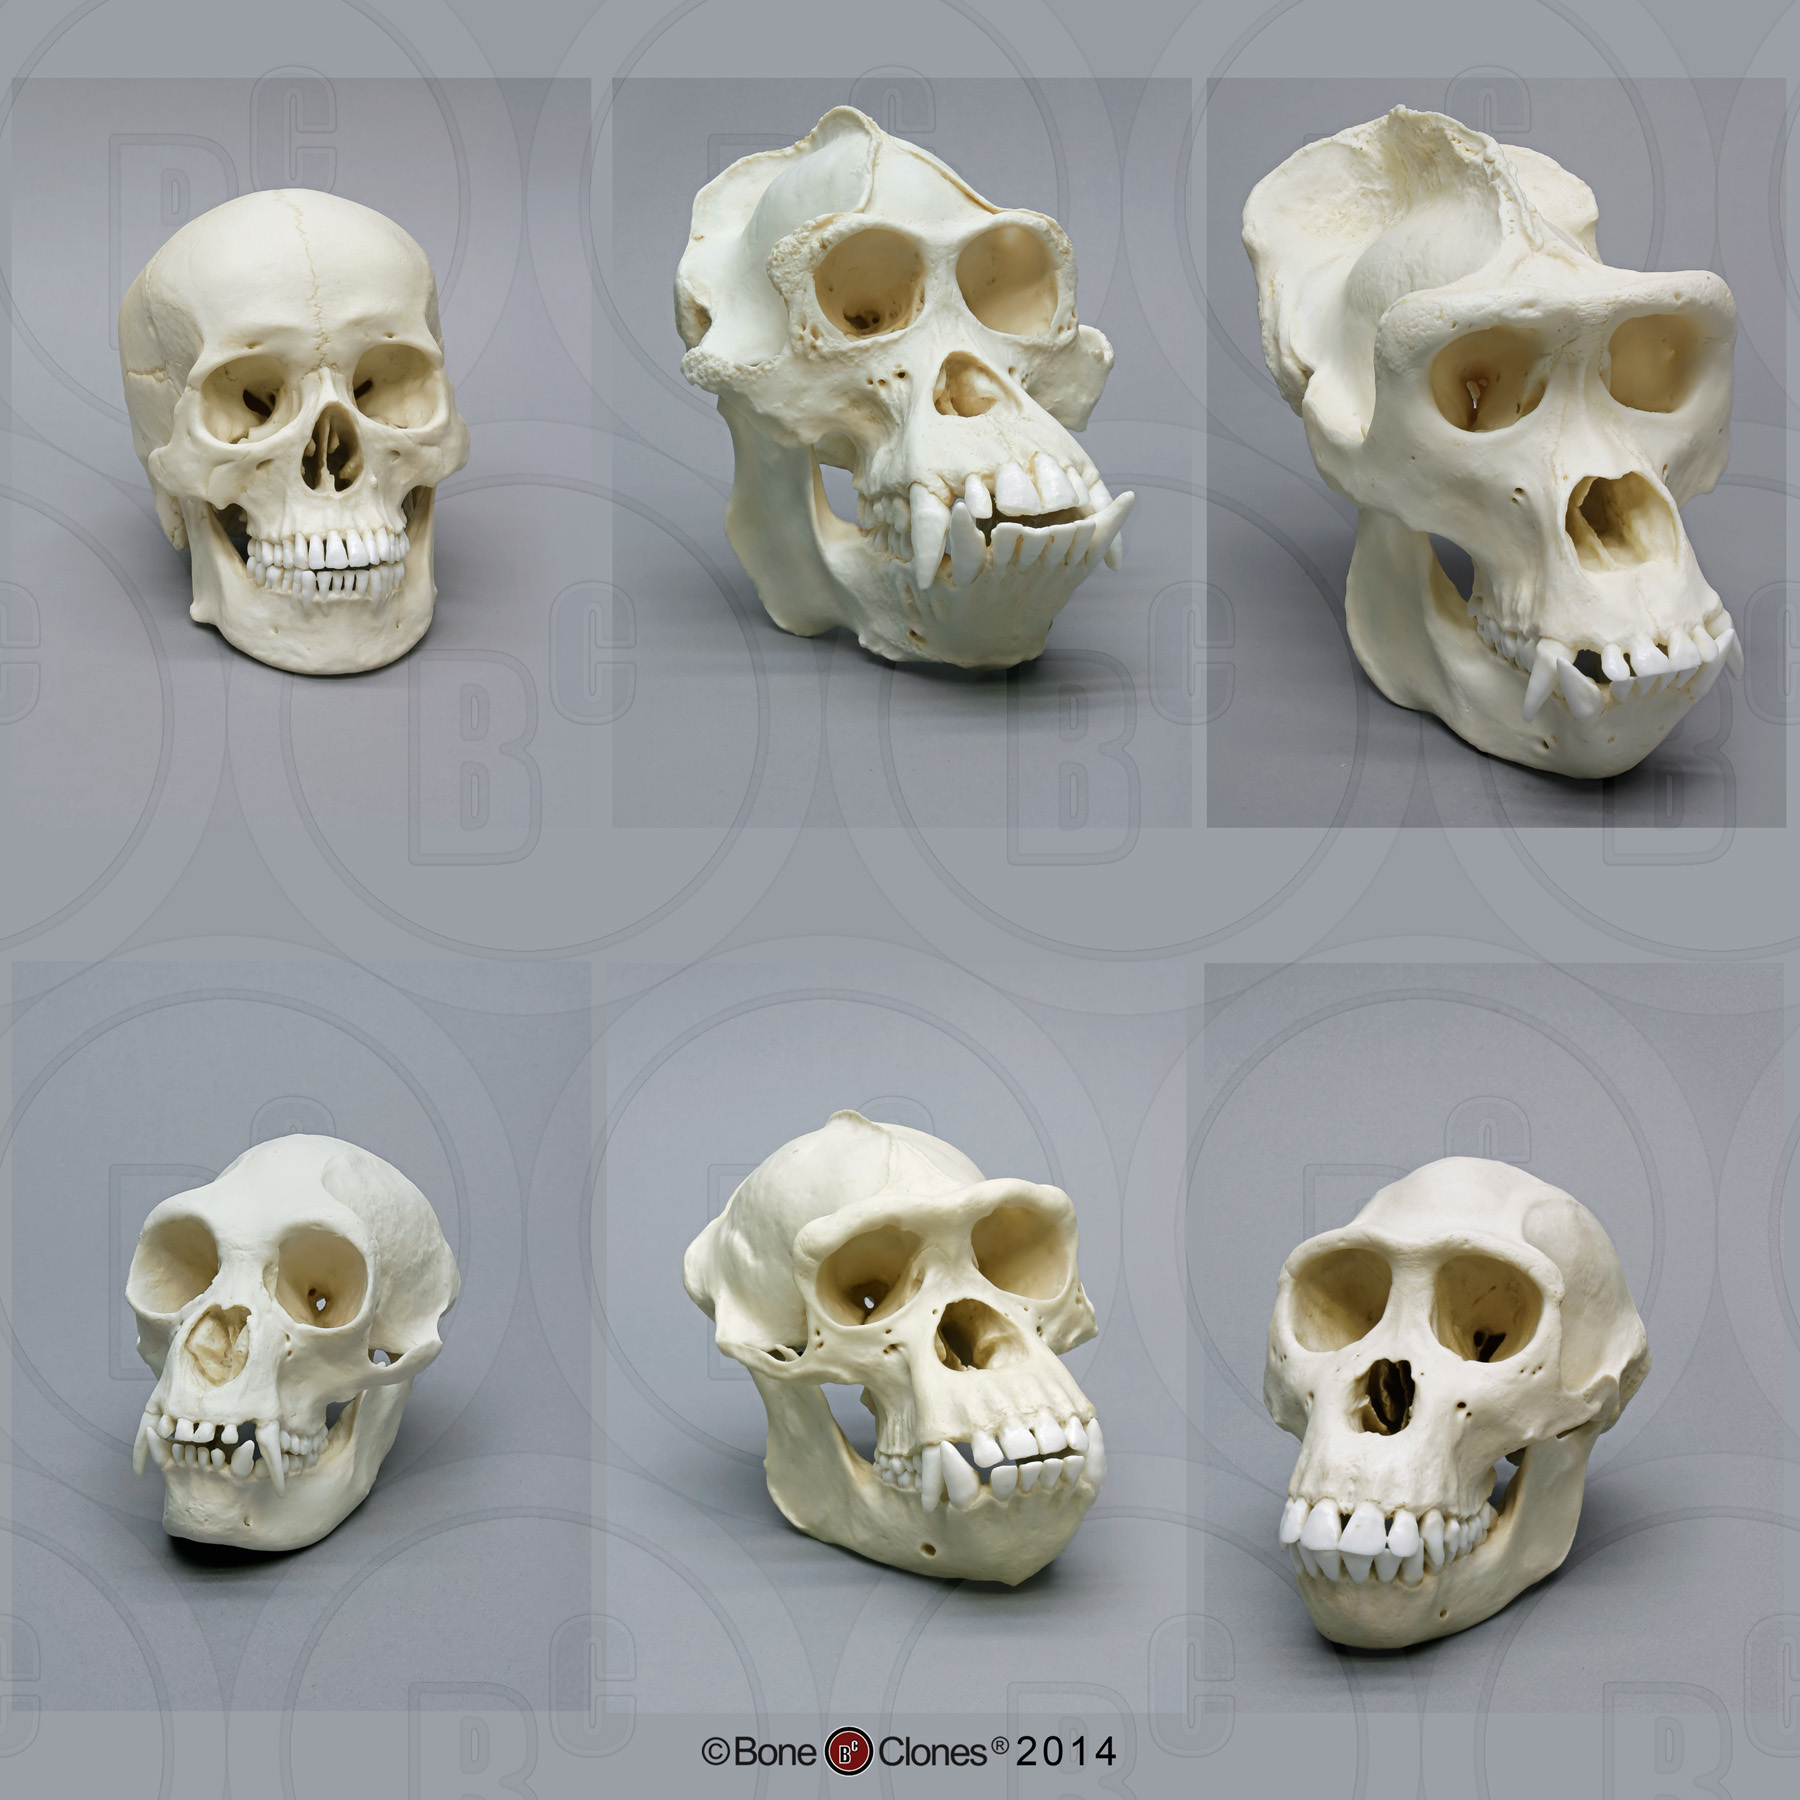 Skull and Bones: Which Edition to Choose? 